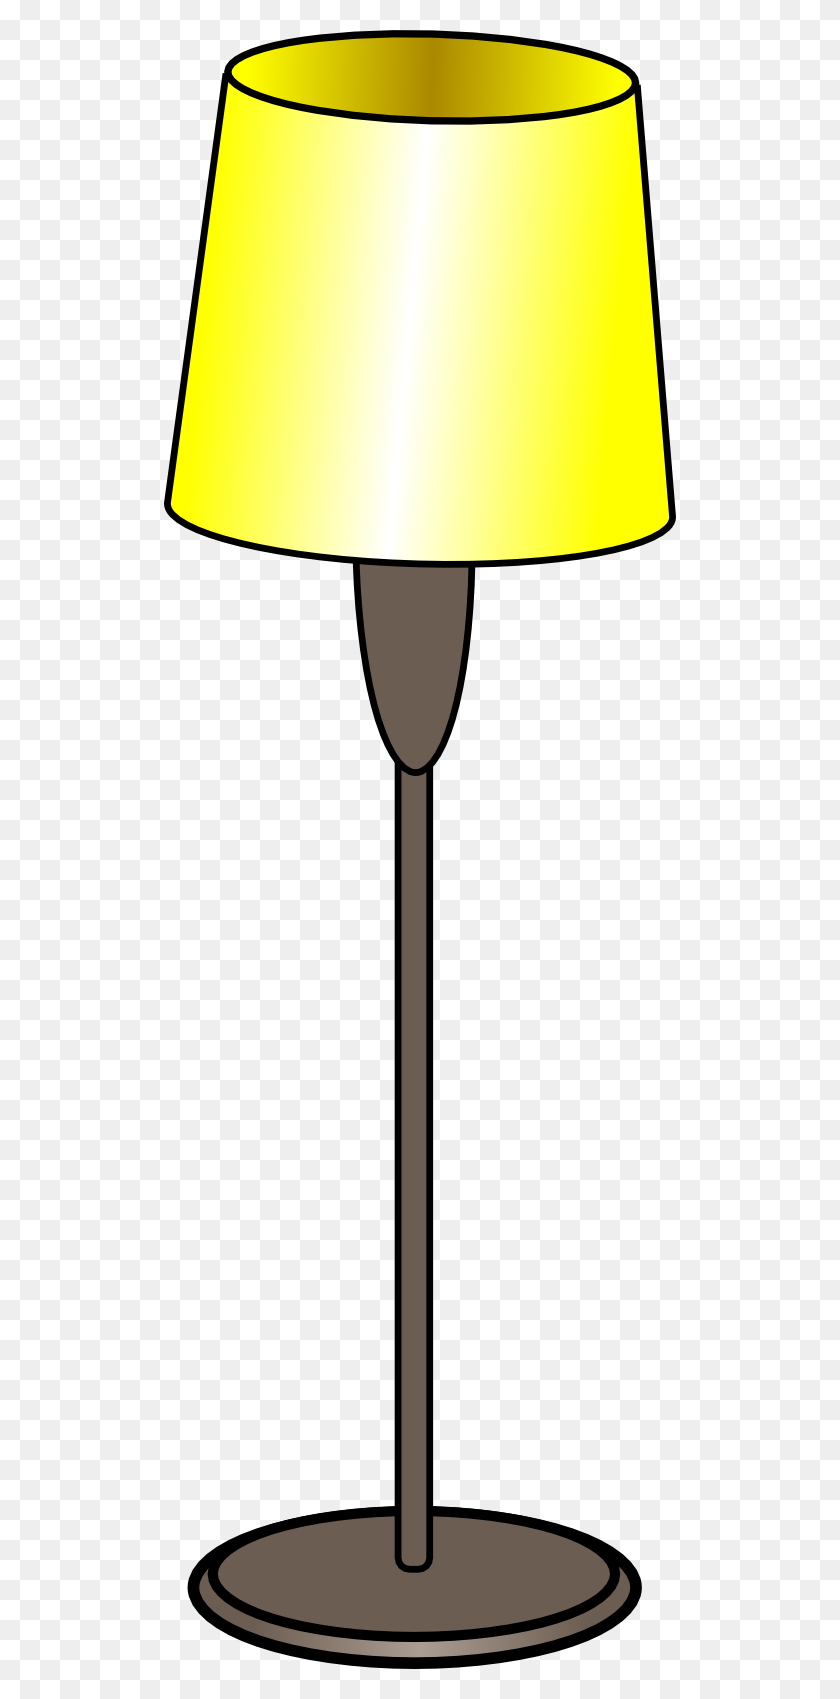 512x1639 Lamp Clipart, Suggestions For Lamp Clipart, Download Lamp Clipart - Aladdin Lamp Clipart